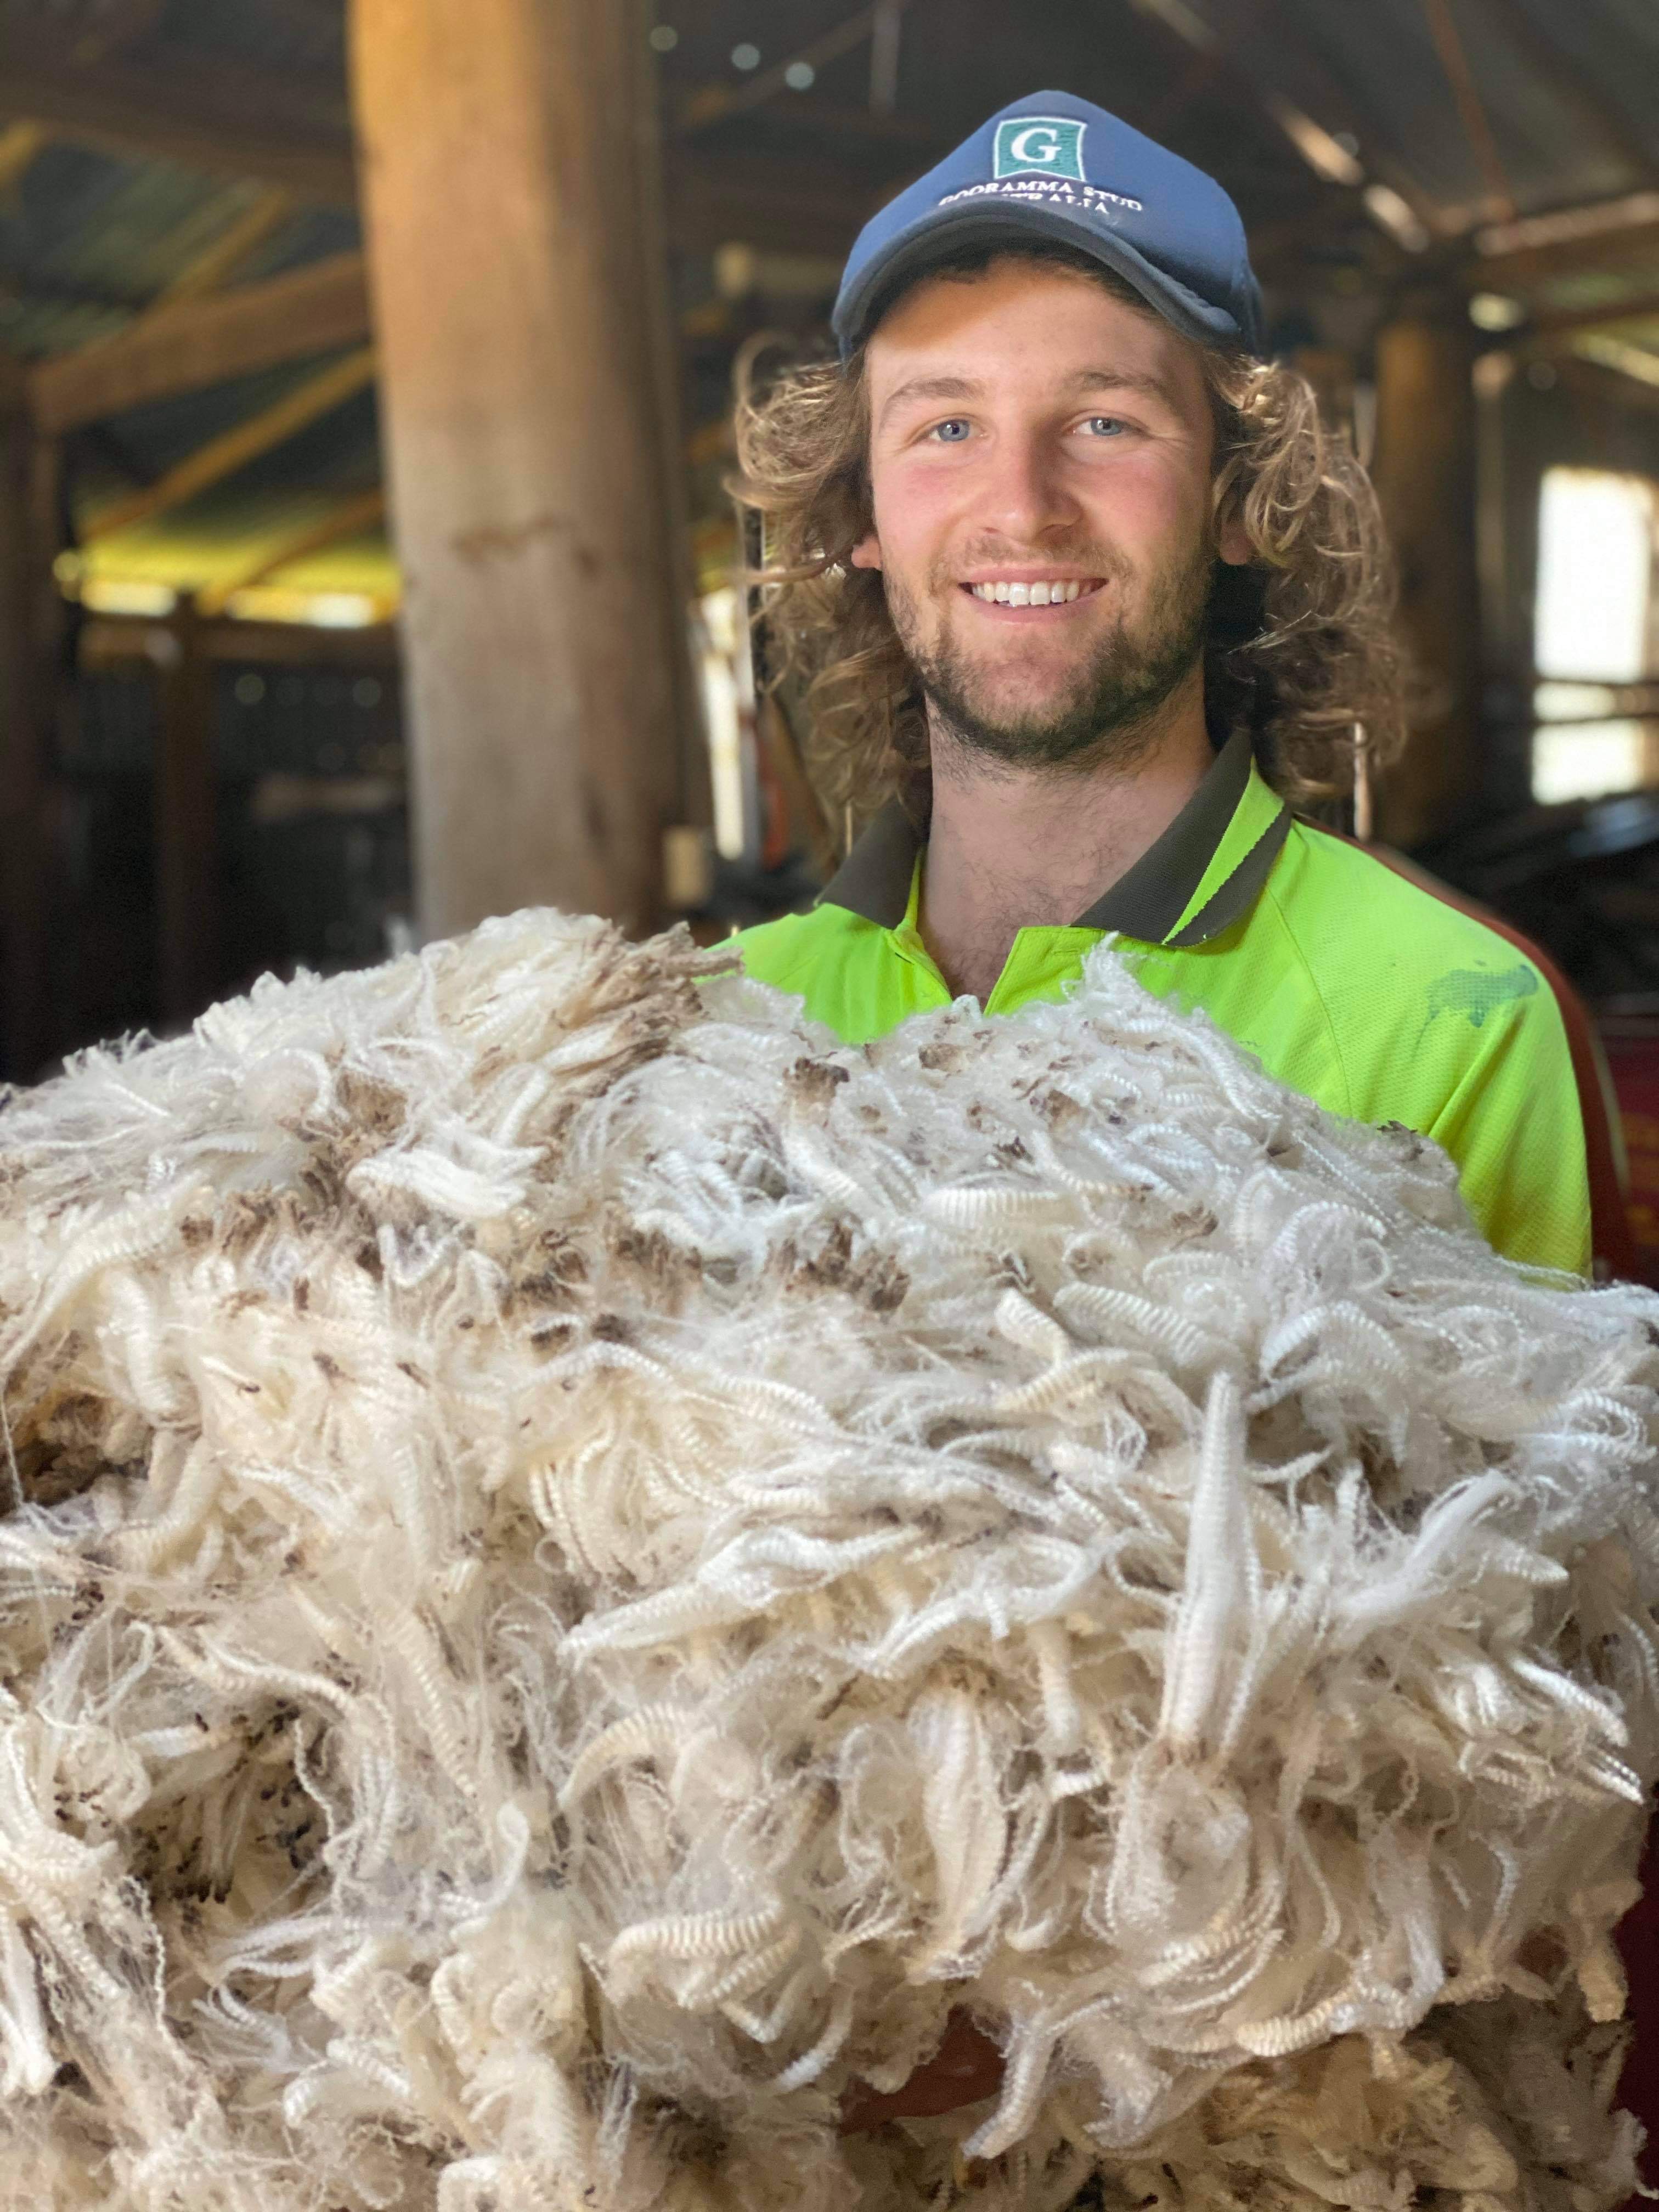 Shear passion takes Wil Stanley to next-level career in wool